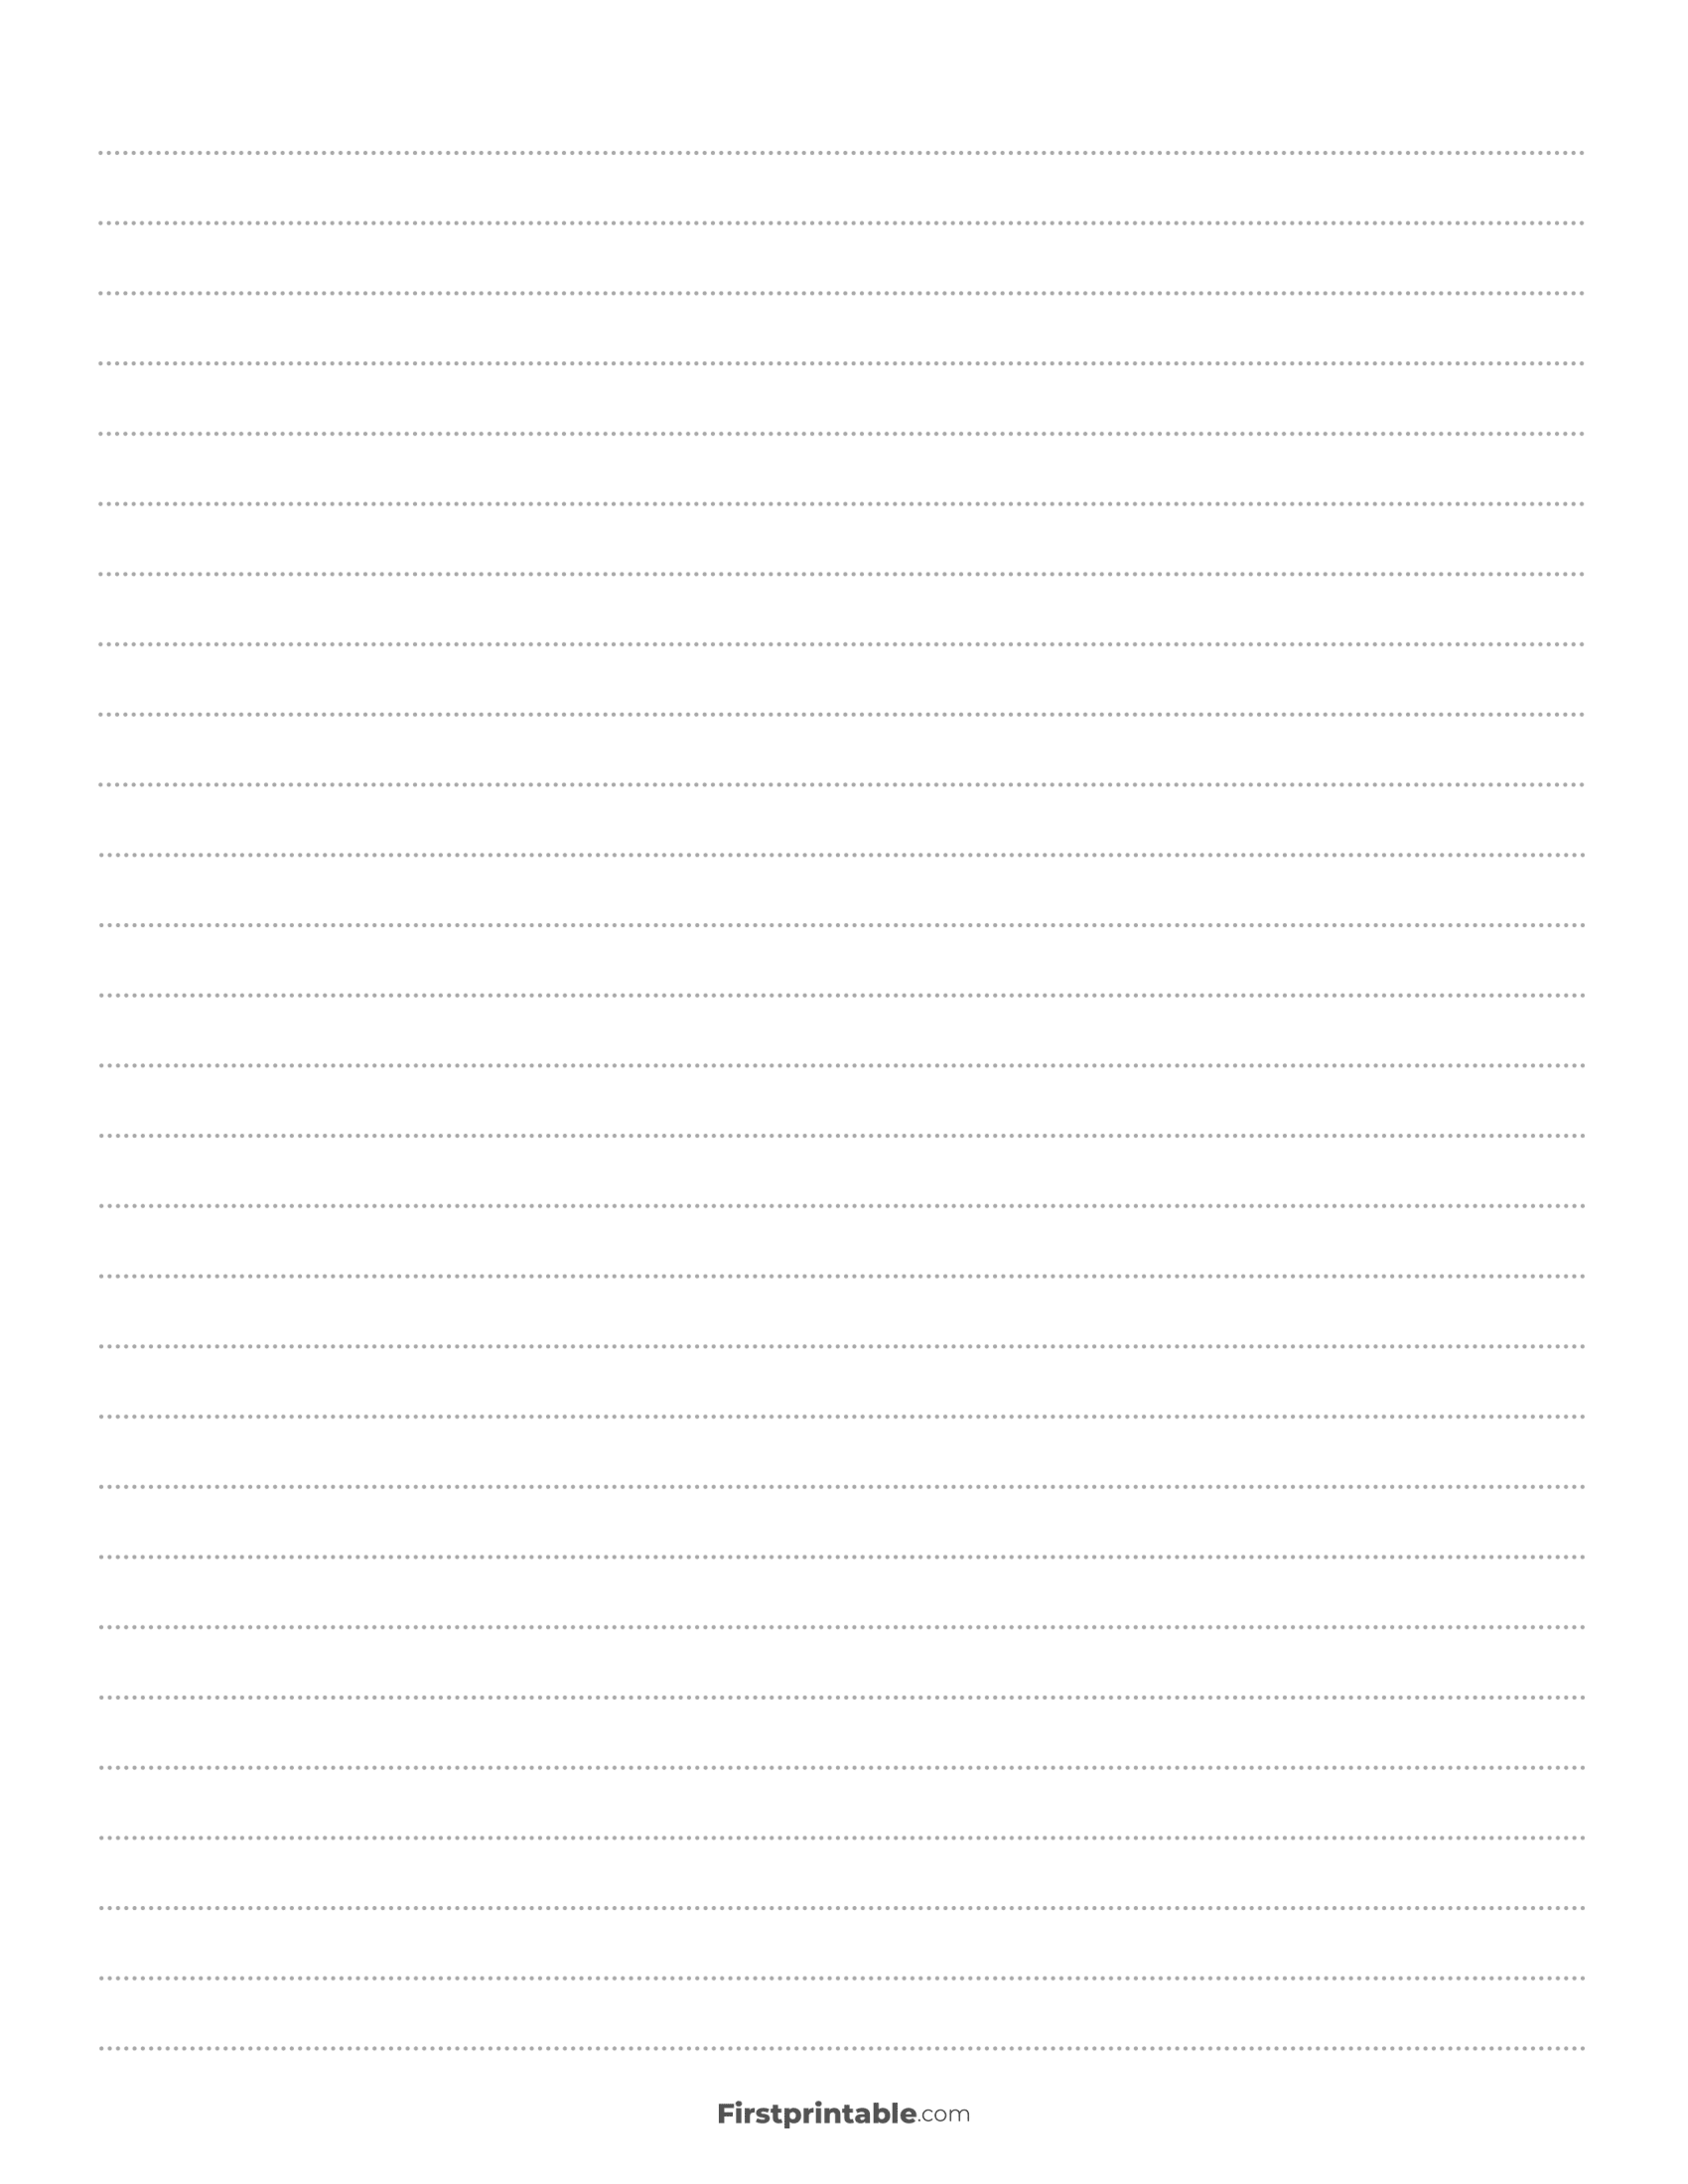 Printable Dotted Lined Paper Template - Wide Ruled